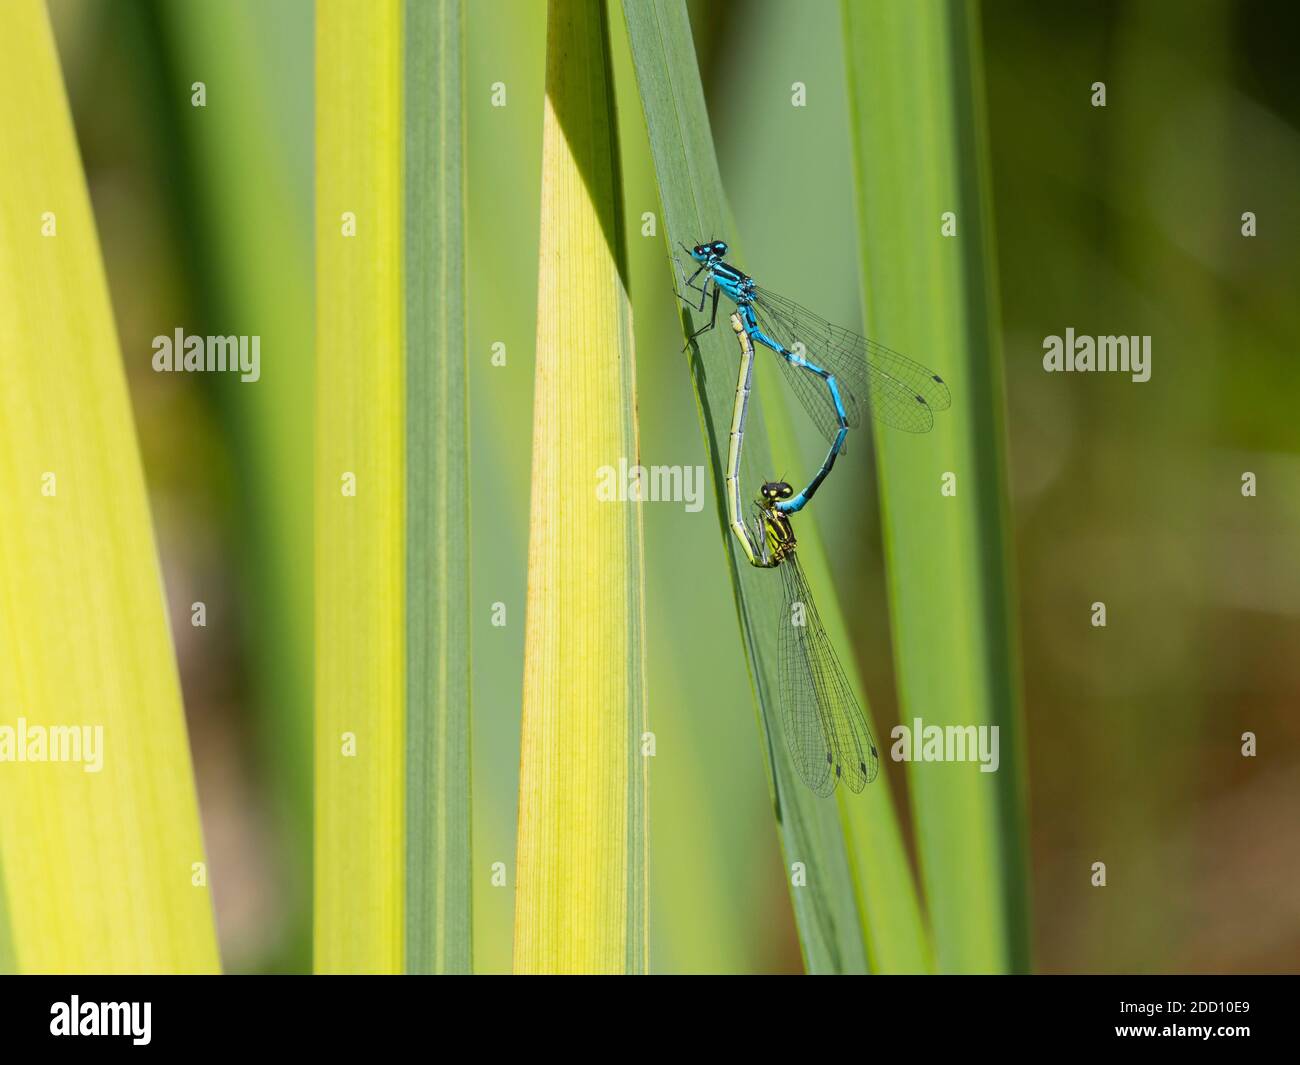 Azure Damselflies, Coenagrion puella, mating, on iris leaves in a pond, Dumfries & Galloway, Scotland Stock Photo